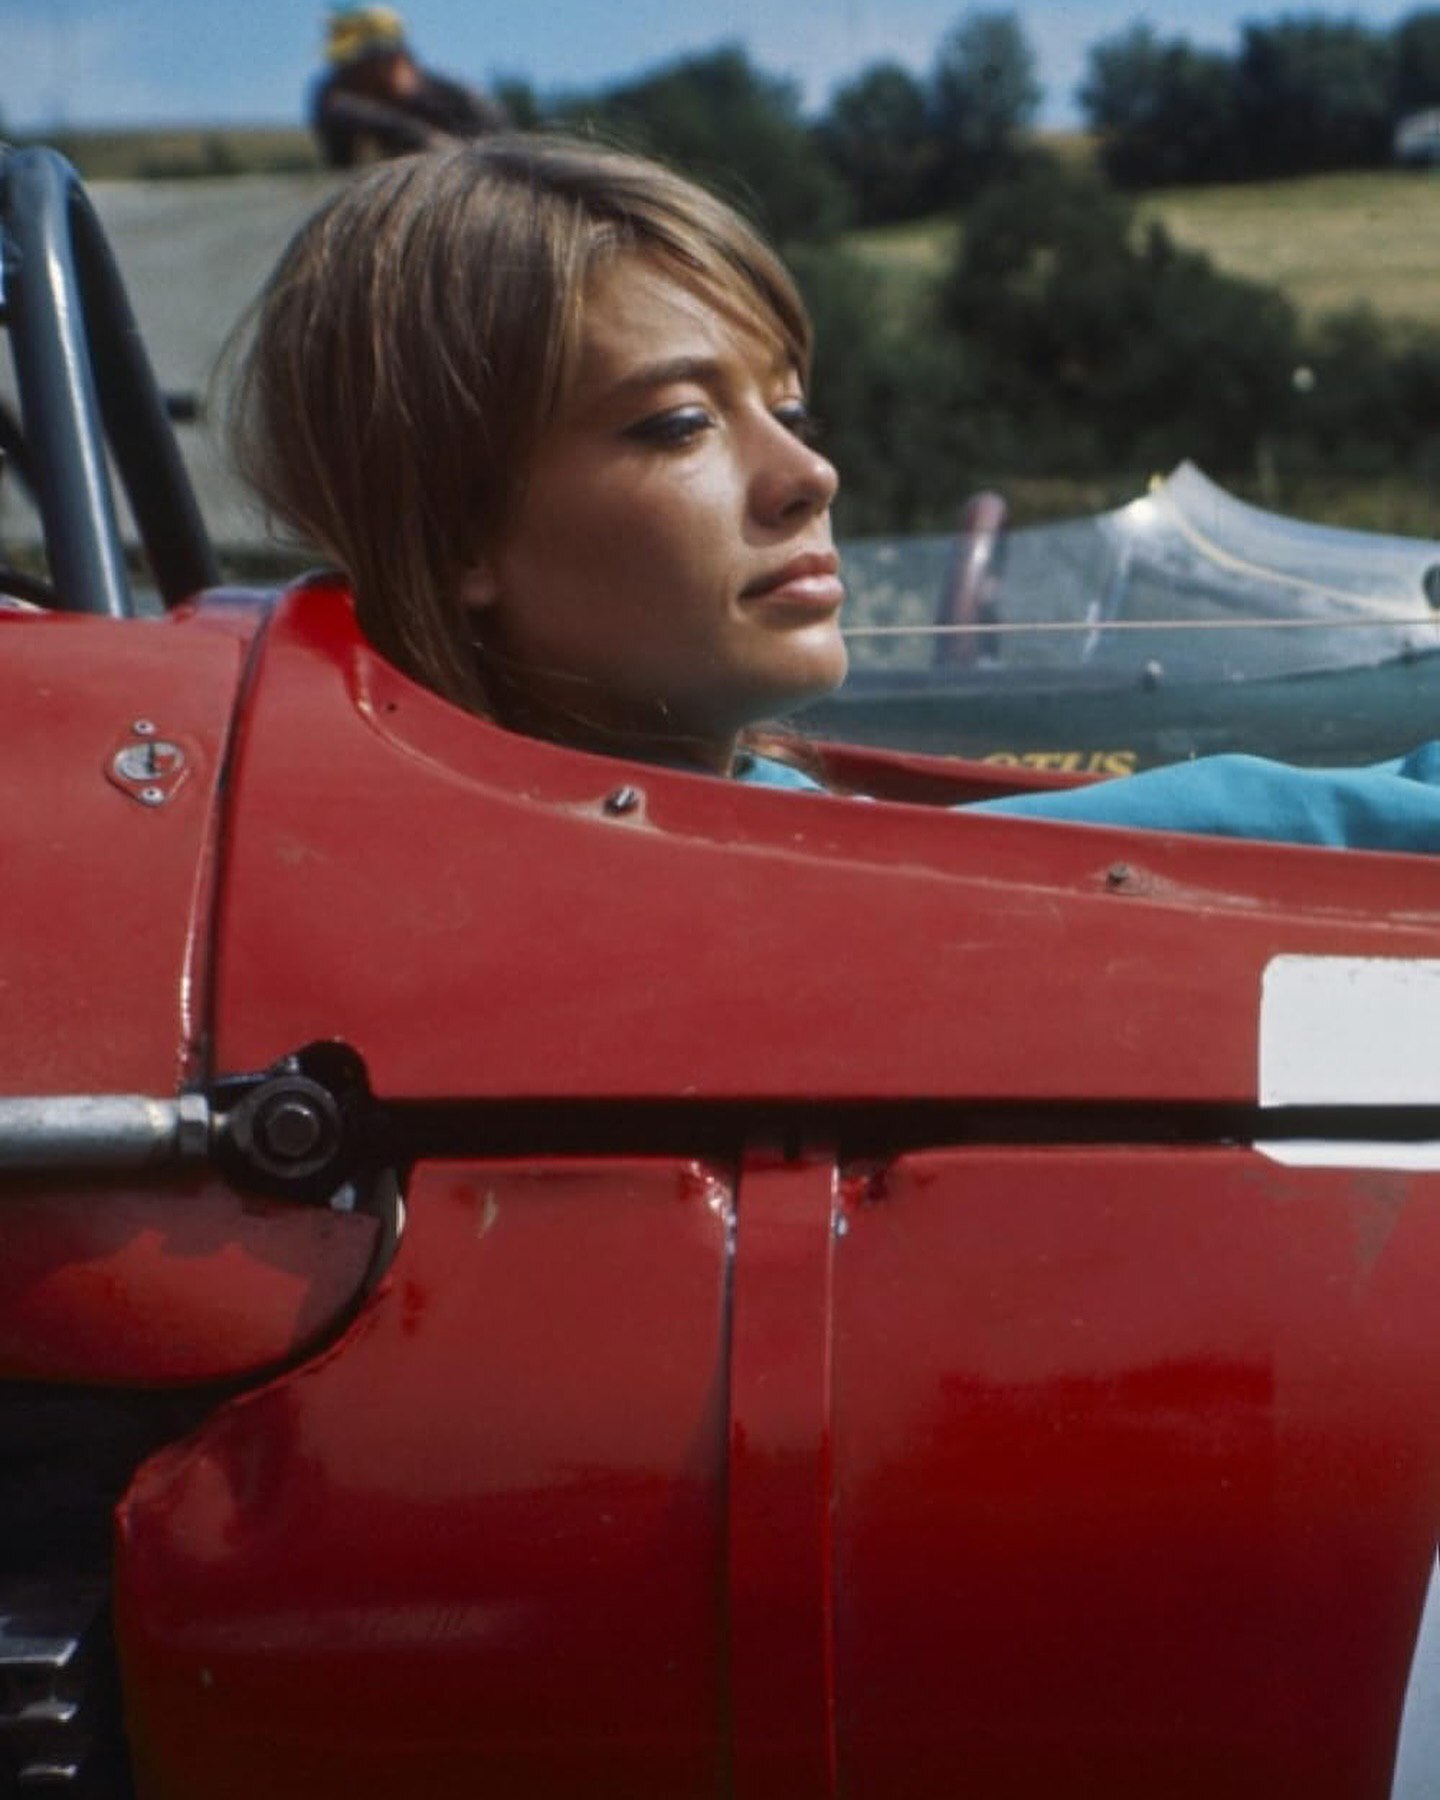 Grand Prix 1966 and Francoise Ardot - Actors and actresses, Celebrities, Photos from filming, Longpost